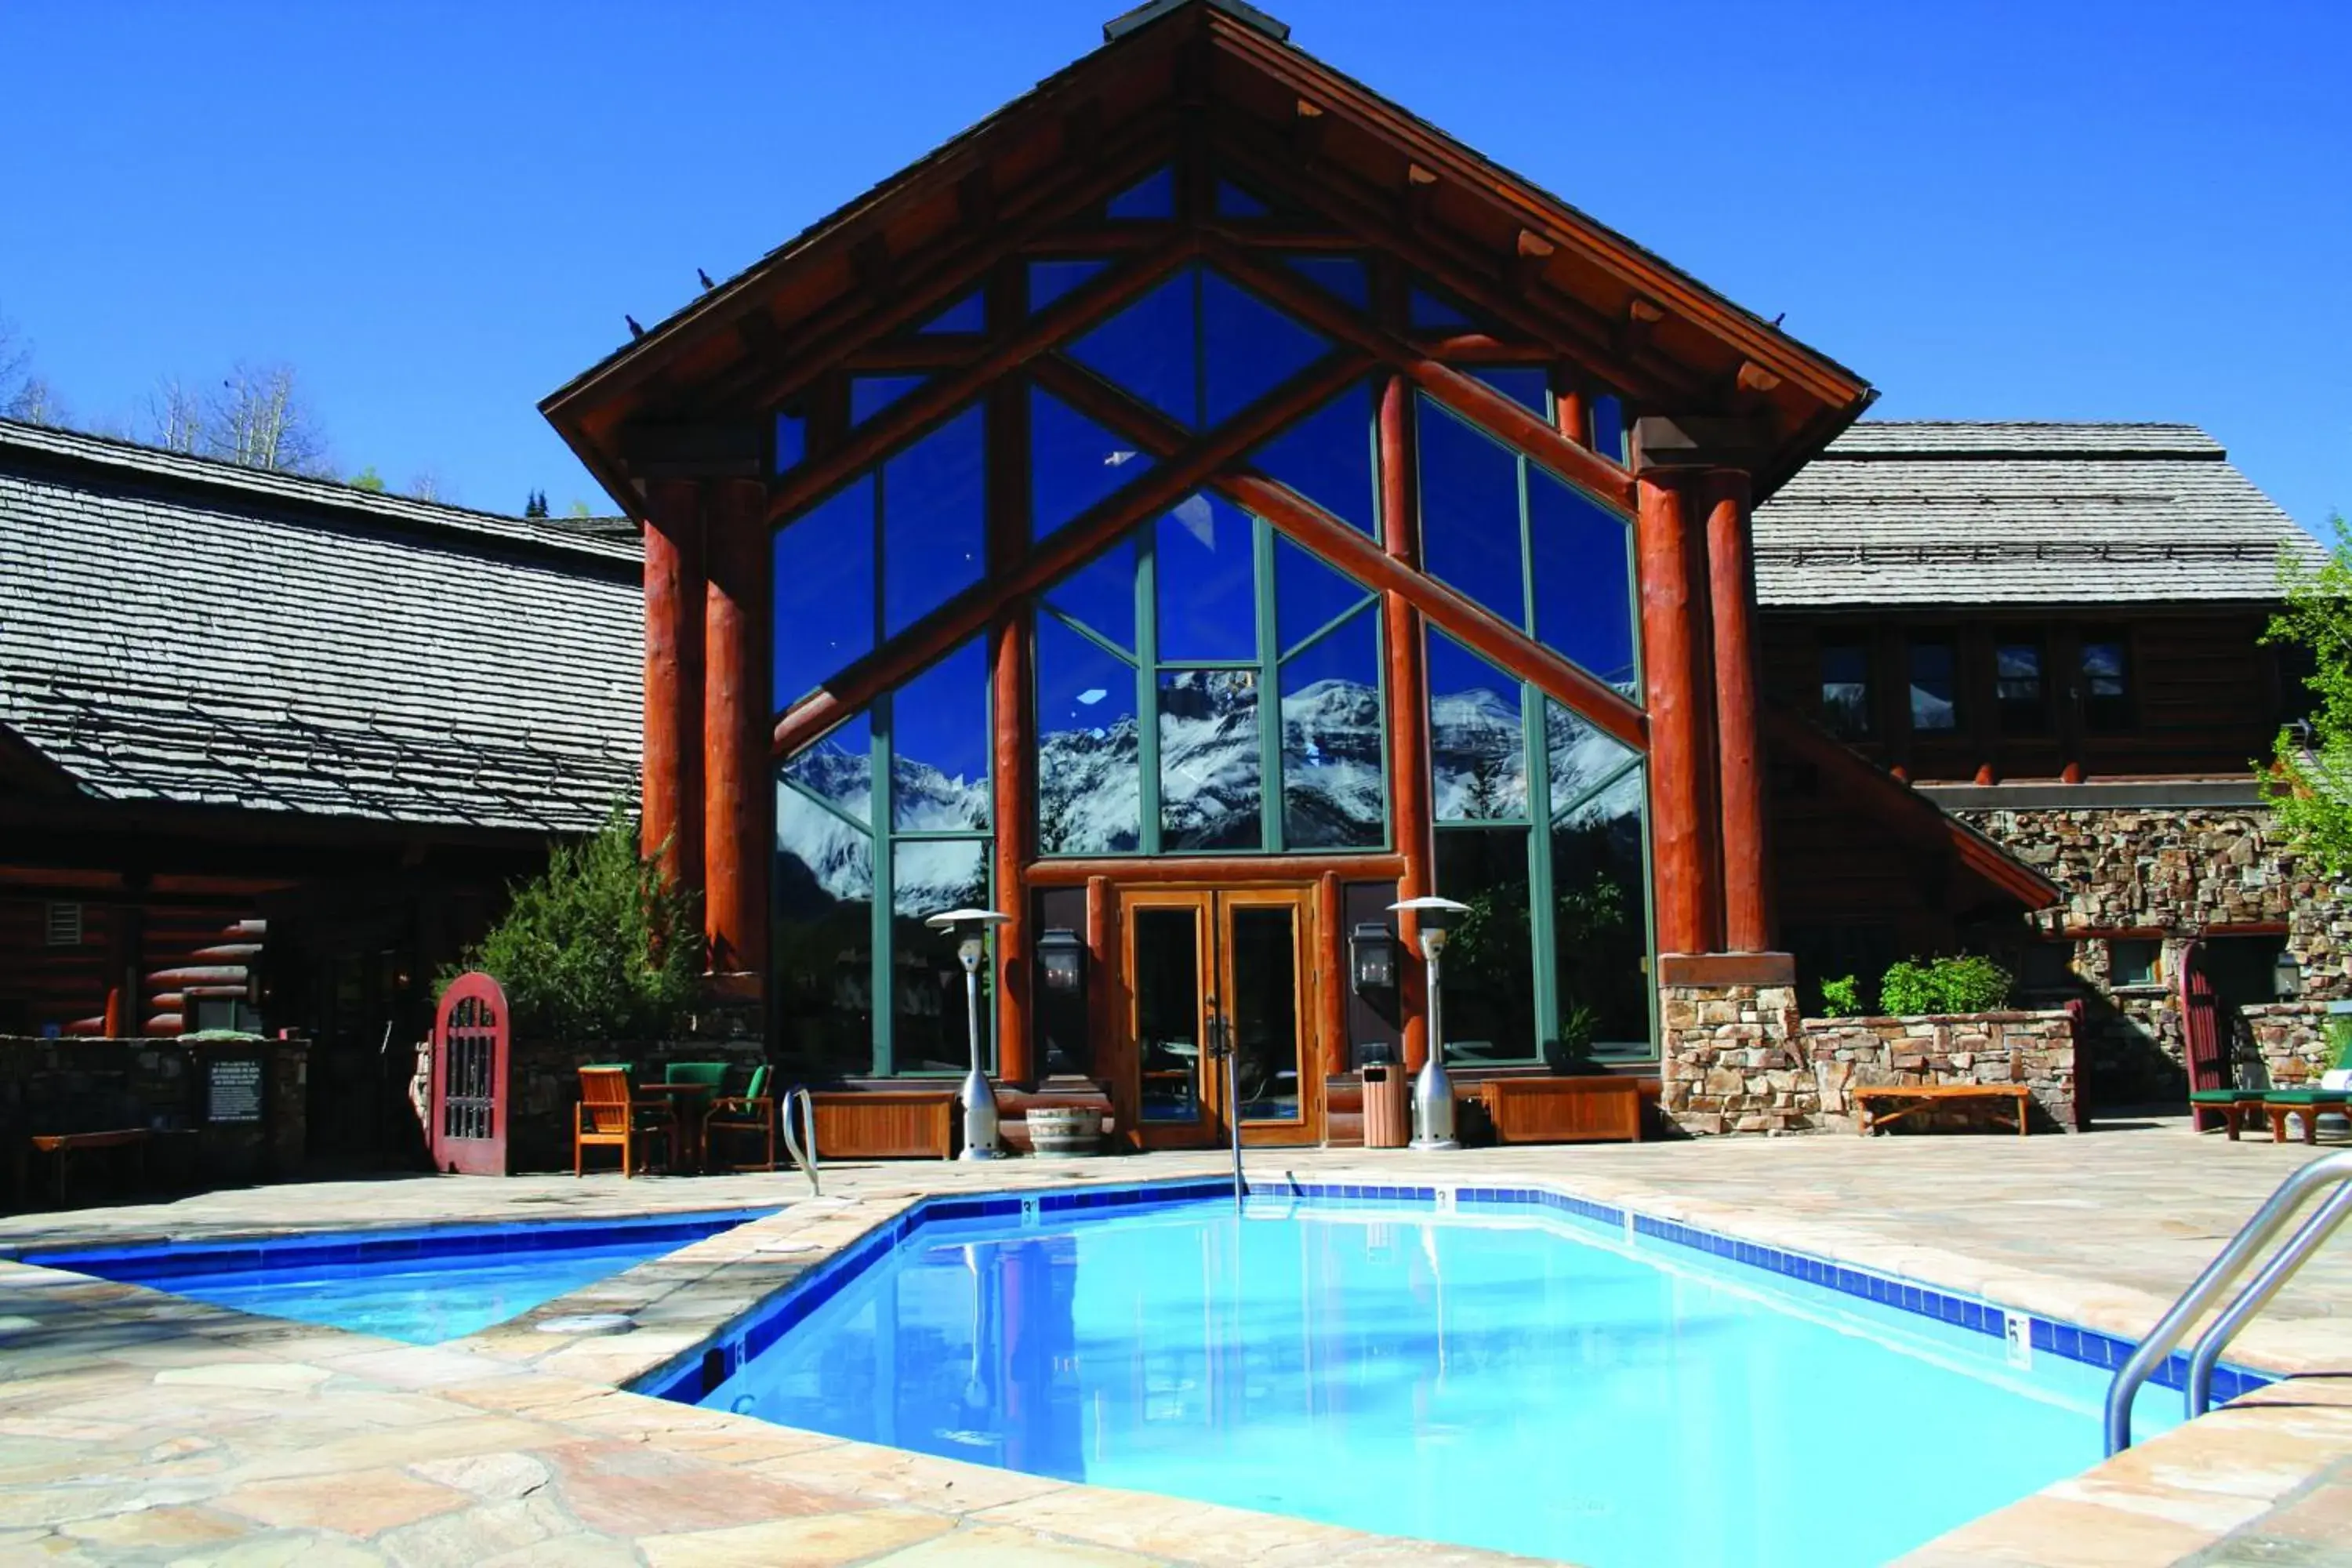 Swimming pool, Property Building in Mountain Lodge at Telluride